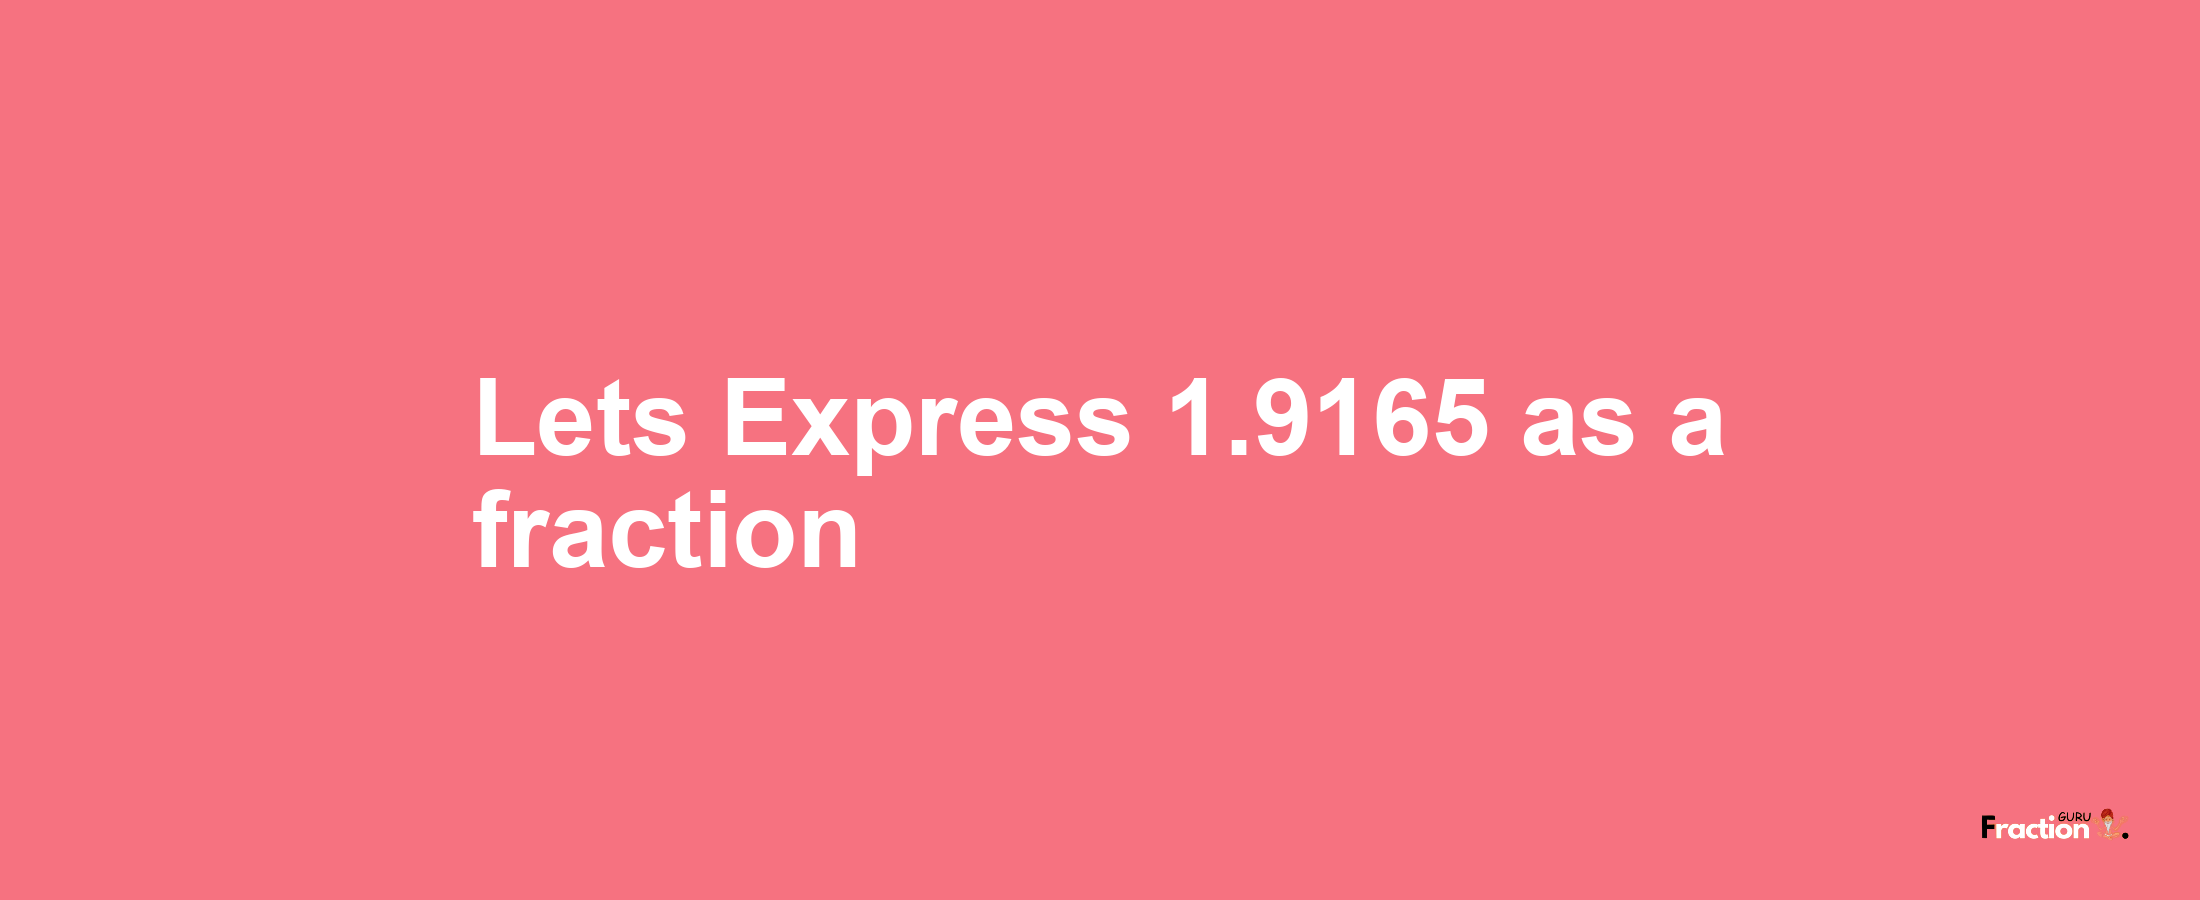 Lets Express 1.9165 as afraction